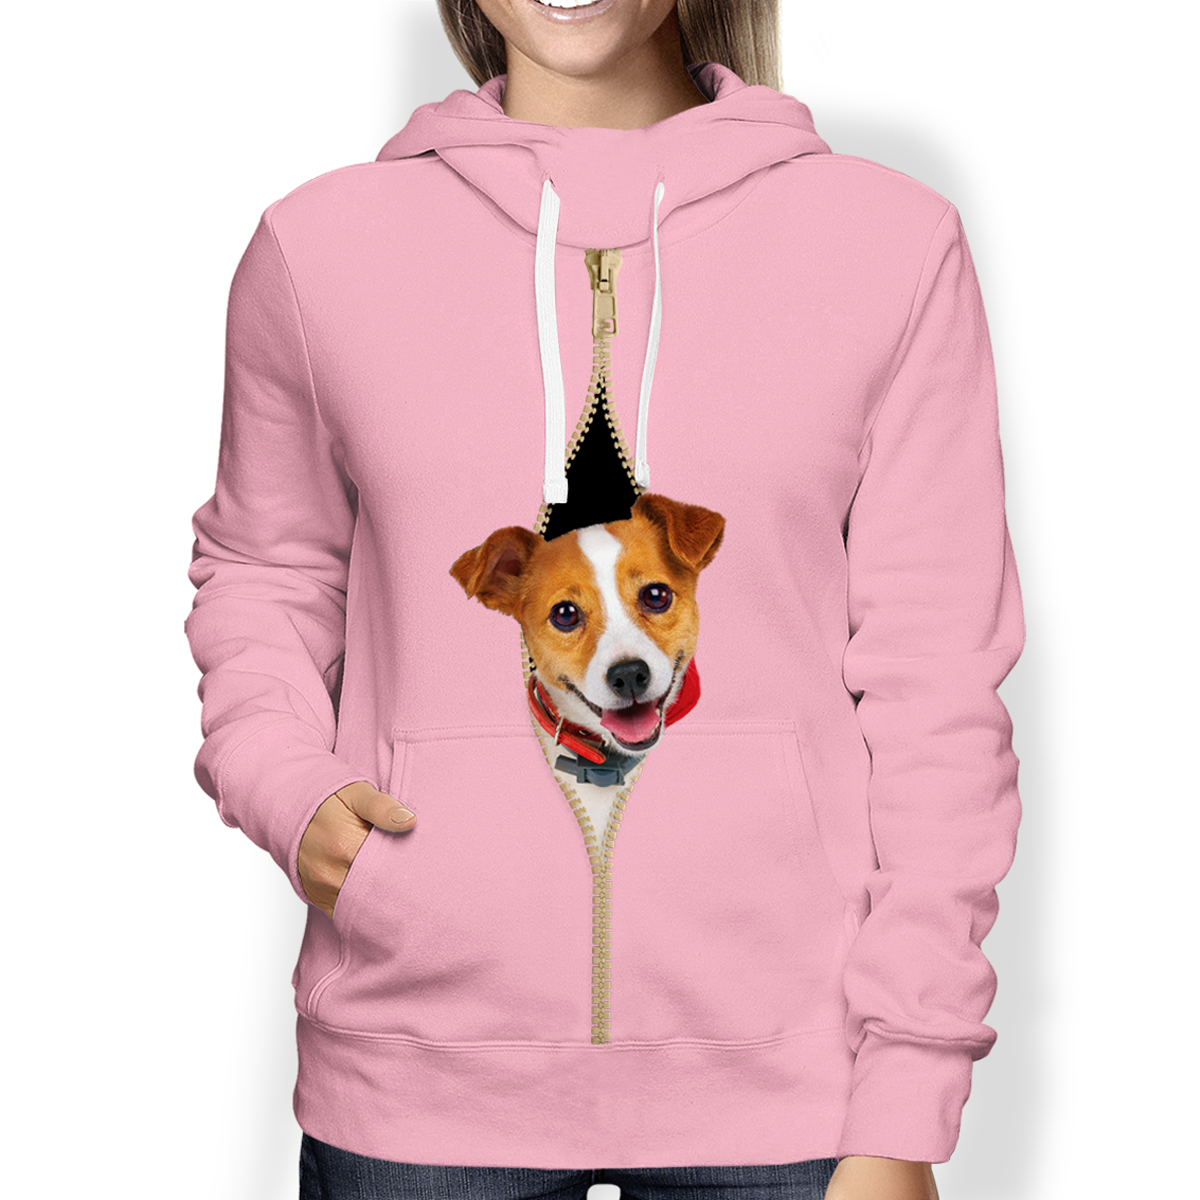 Hoodie With Your Pet's Photo - 11